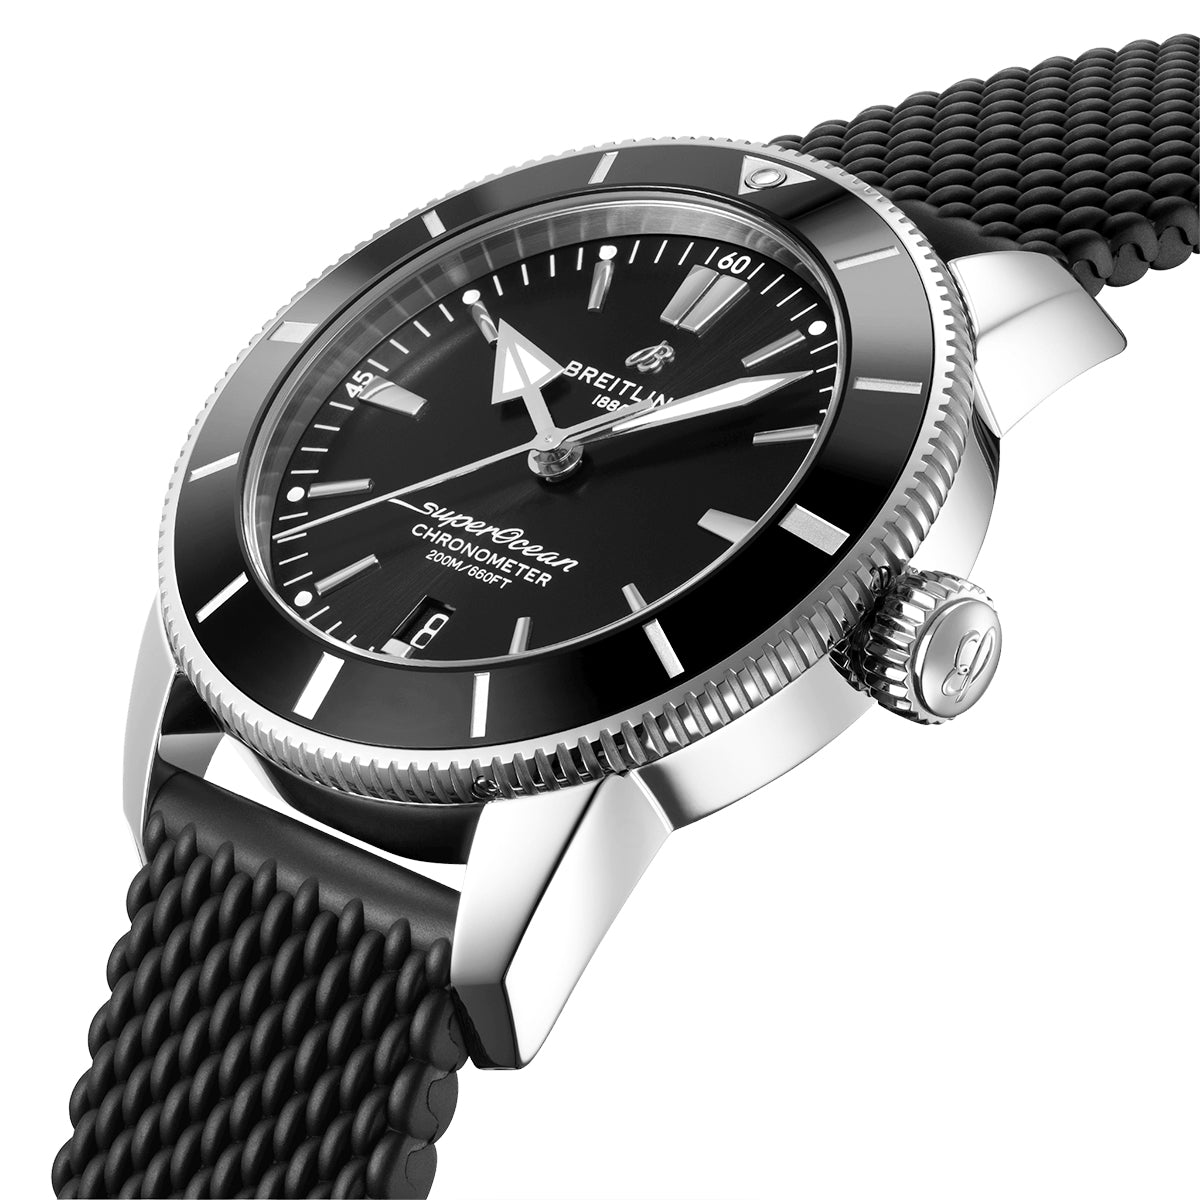 Superocean Heritage II 44mm Black Dial Automatic Rubber Strap Watch